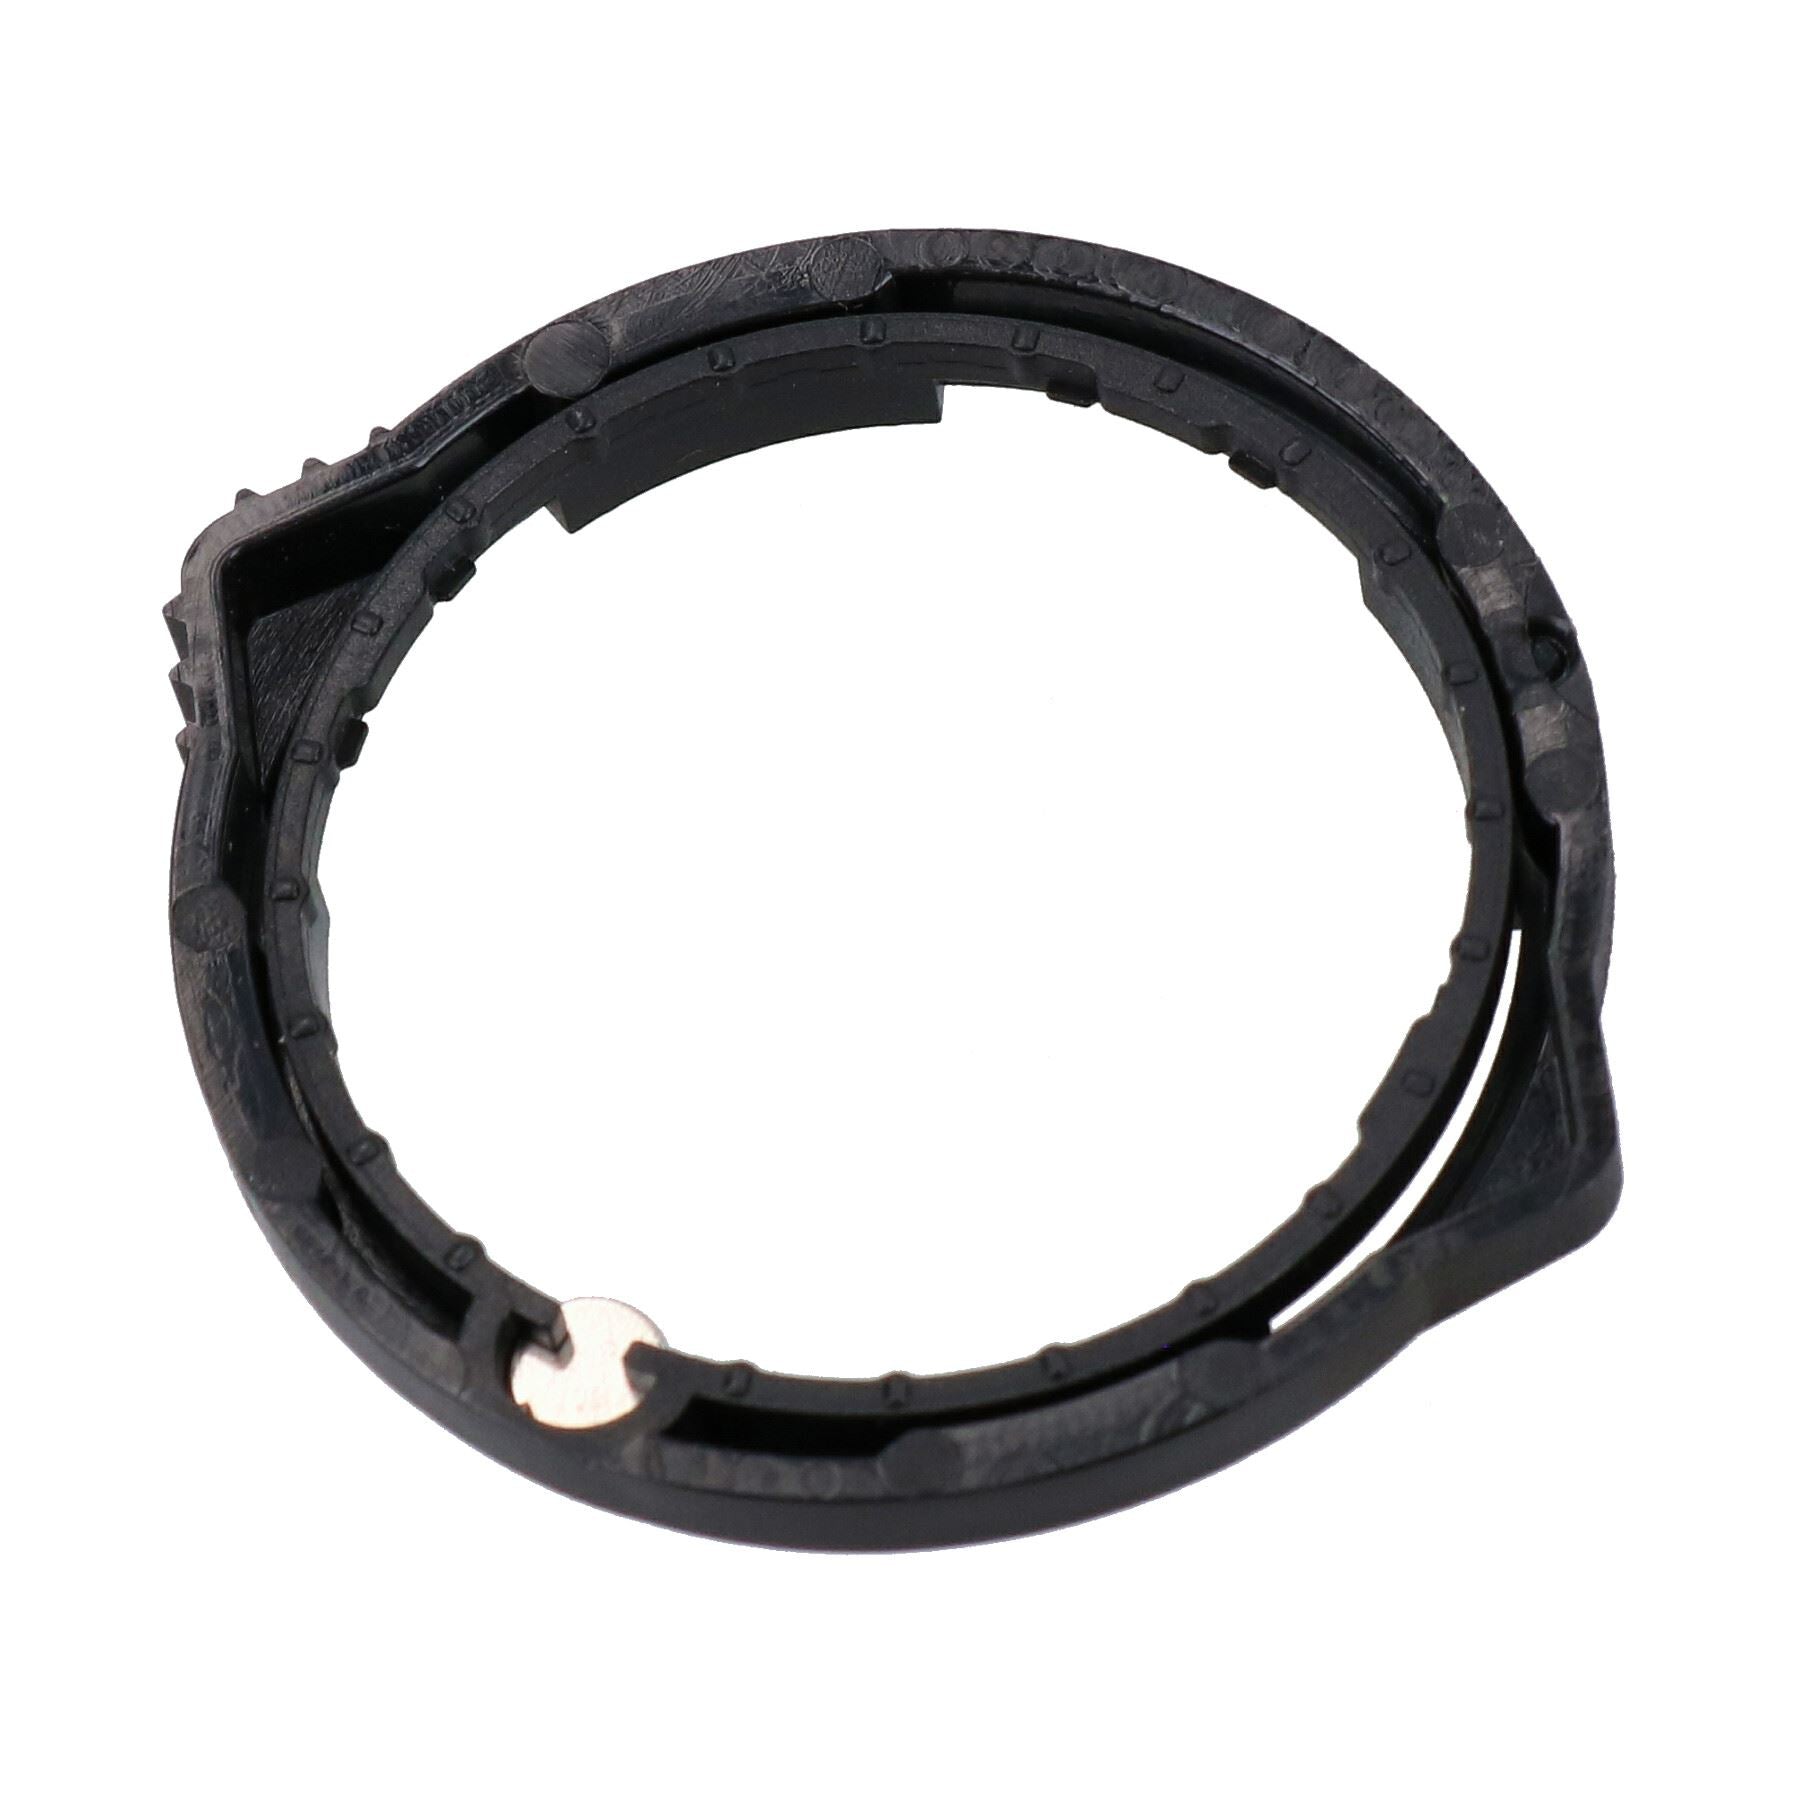 Orbiloc Dog LED Safety Light Mode Selector Ring Replacement